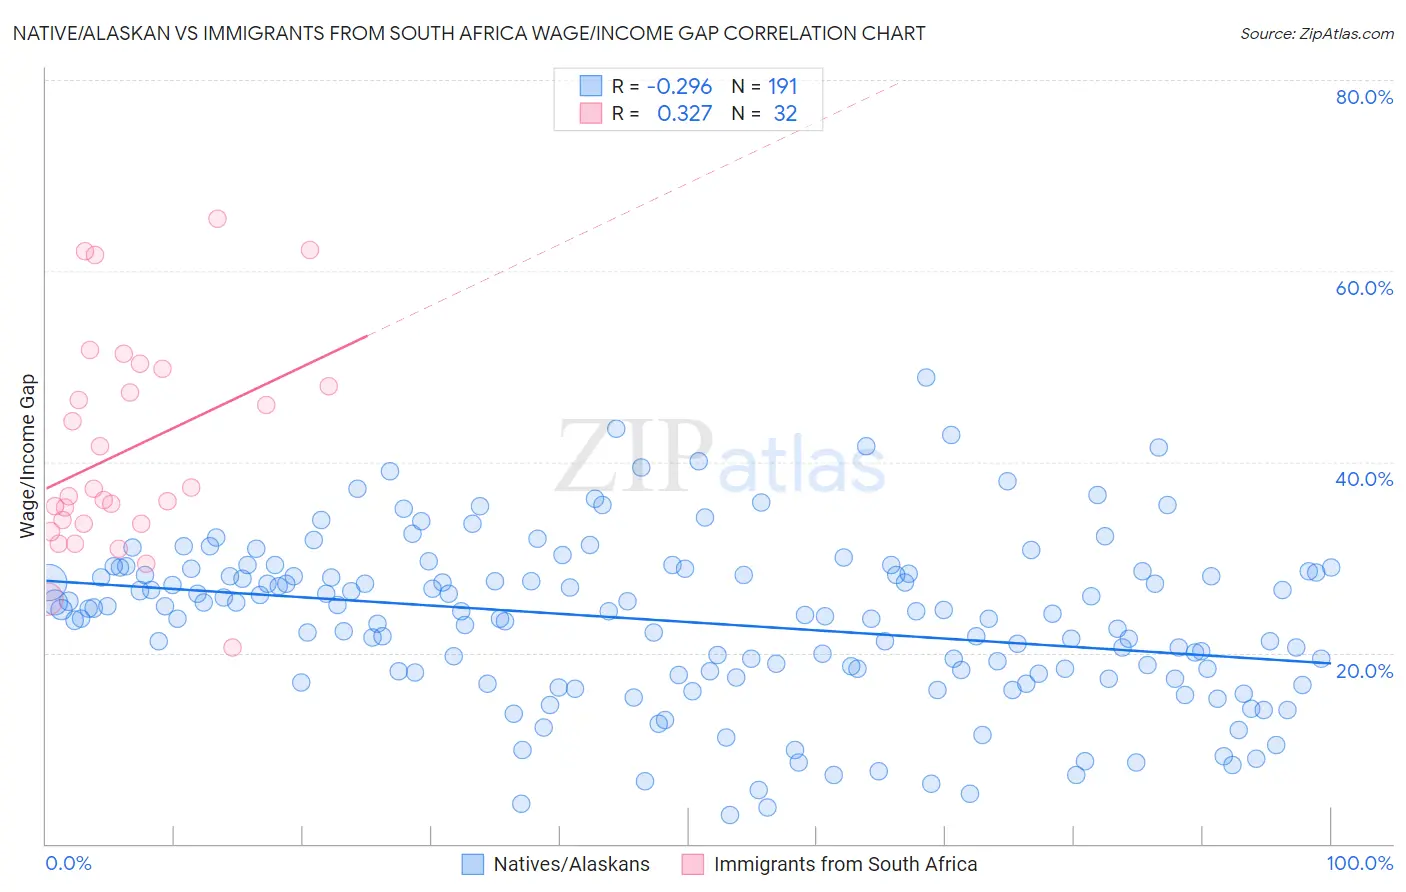 Native/Alaskan vs Immigrants from South Africa Wage/Income Gap